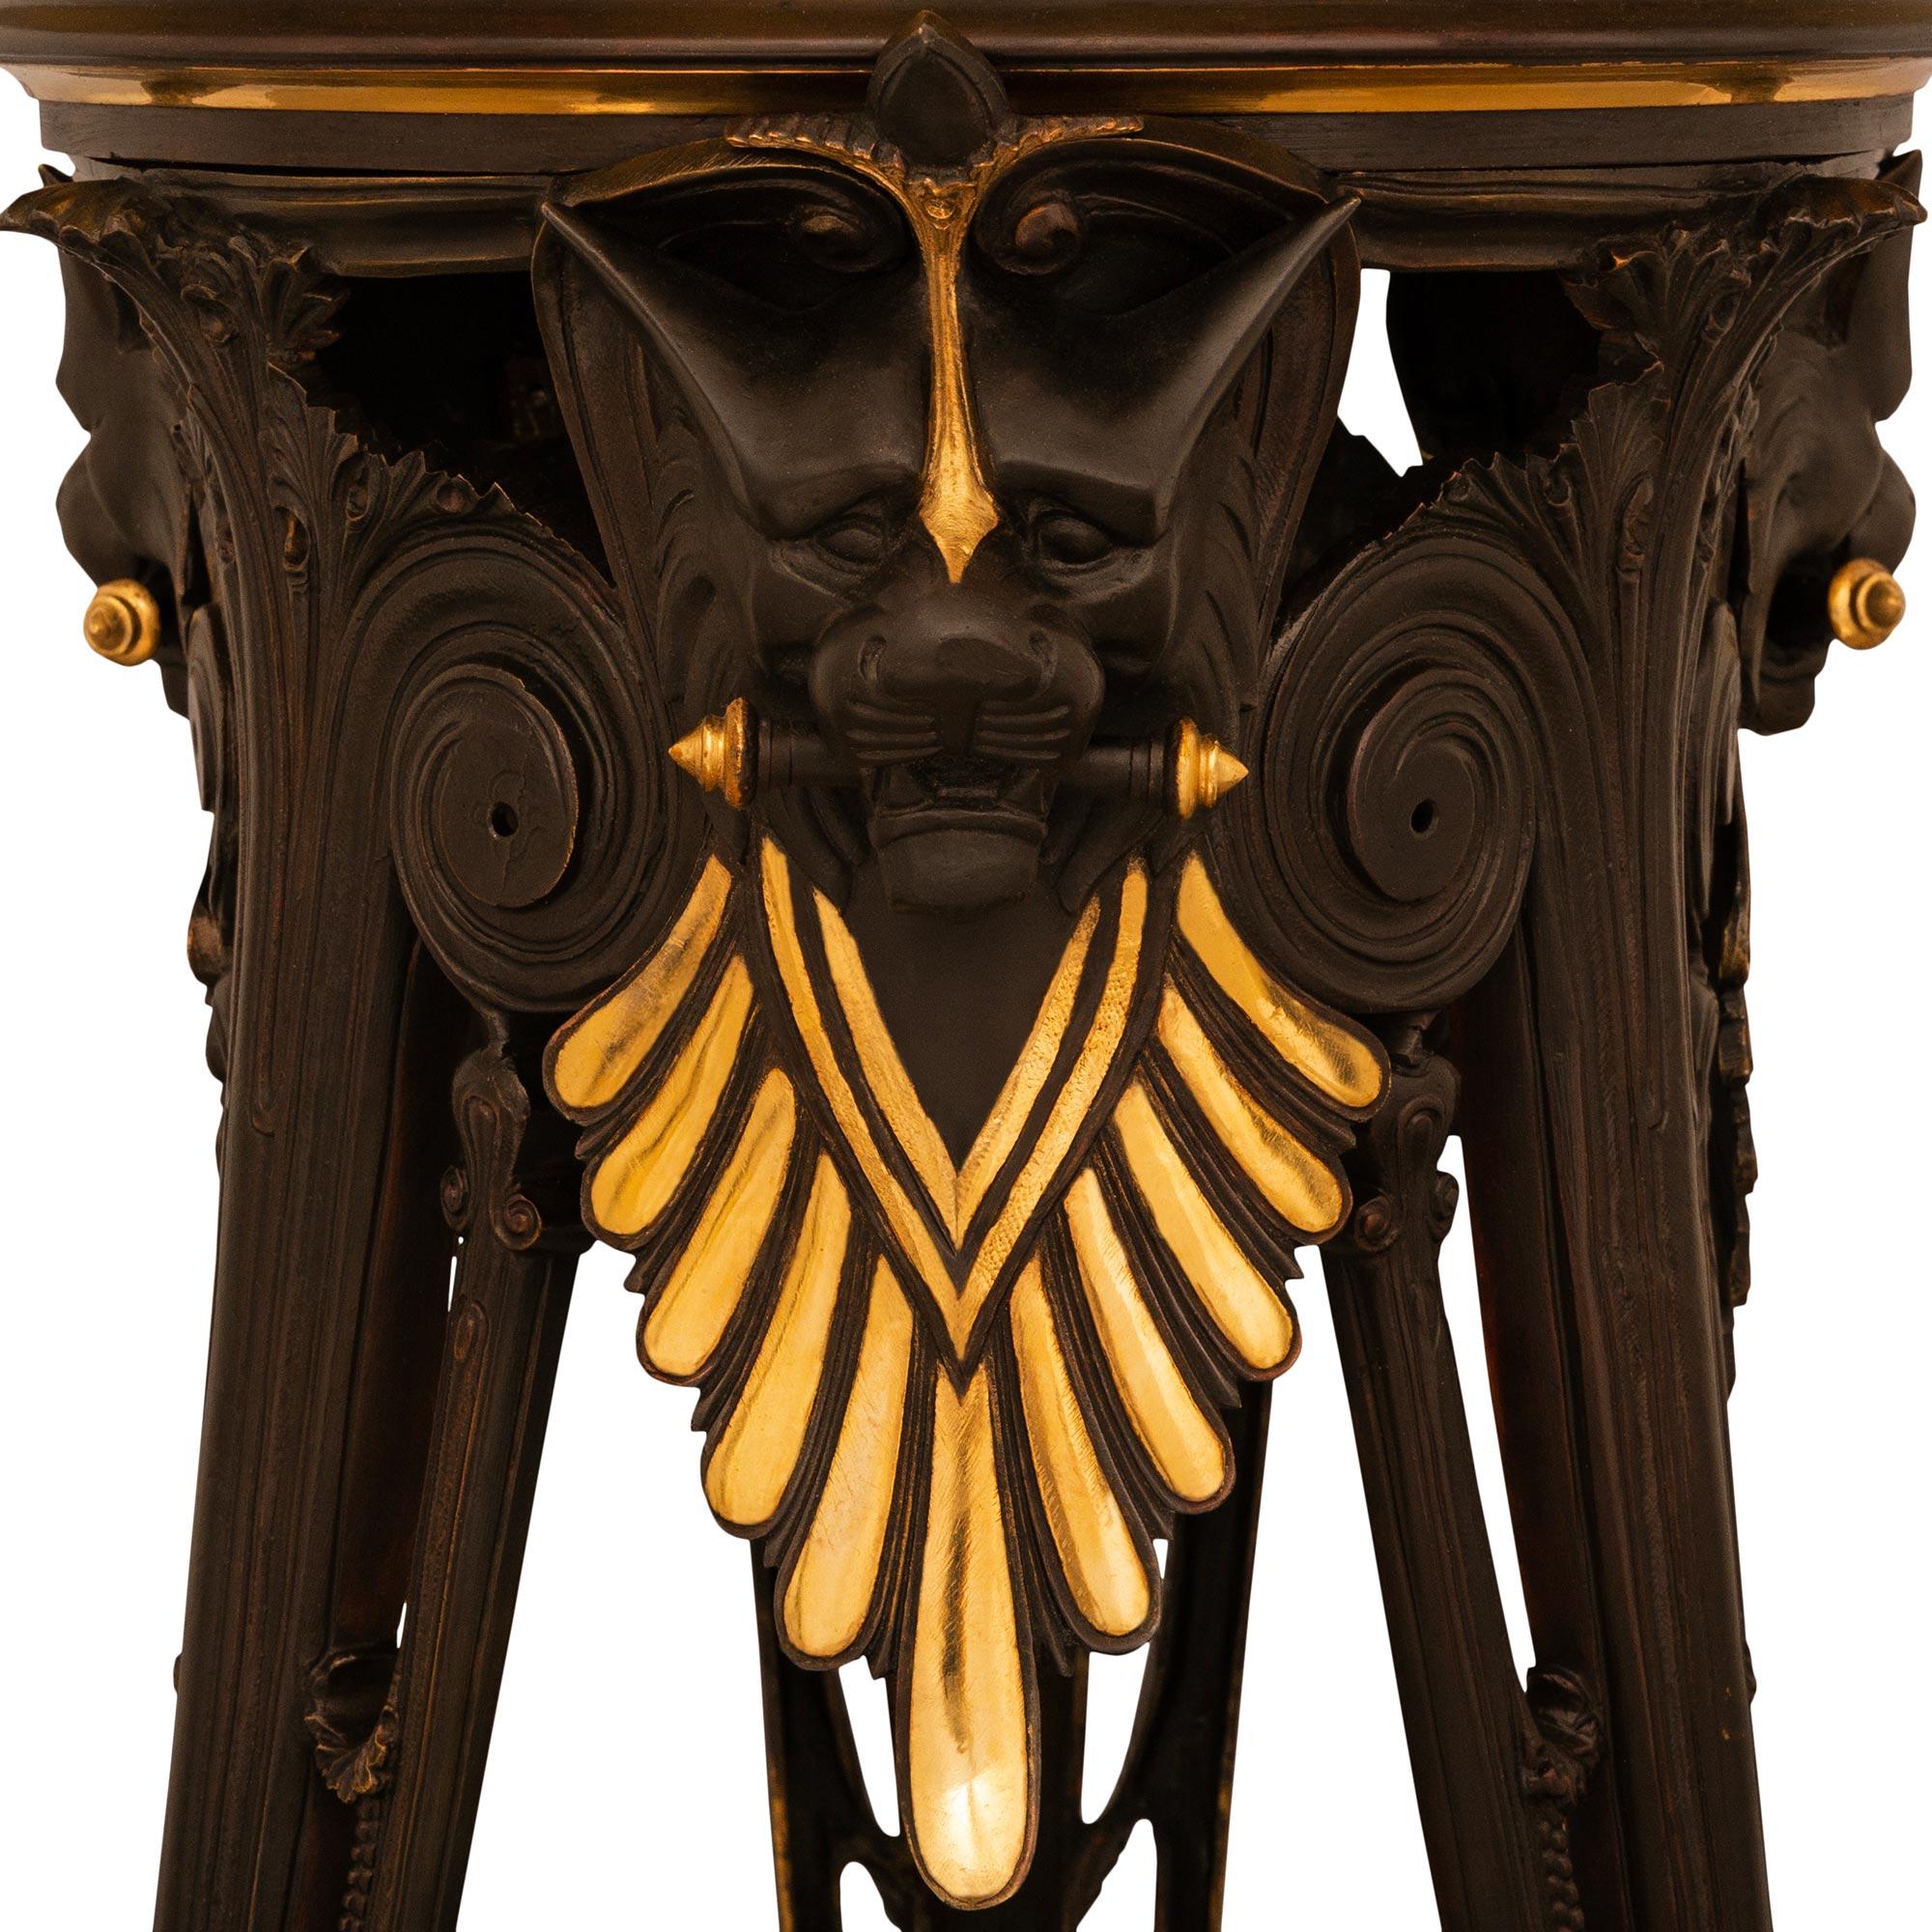 A most impressive pair of French 19th century Neo-Greek st. Ormolu and patinated Bronze pedestals, attributed to G. Servant, France, Circa 1880. Each handsome pedestal is raised by three pierced straight patinated Bronze legs above cabriole shaped